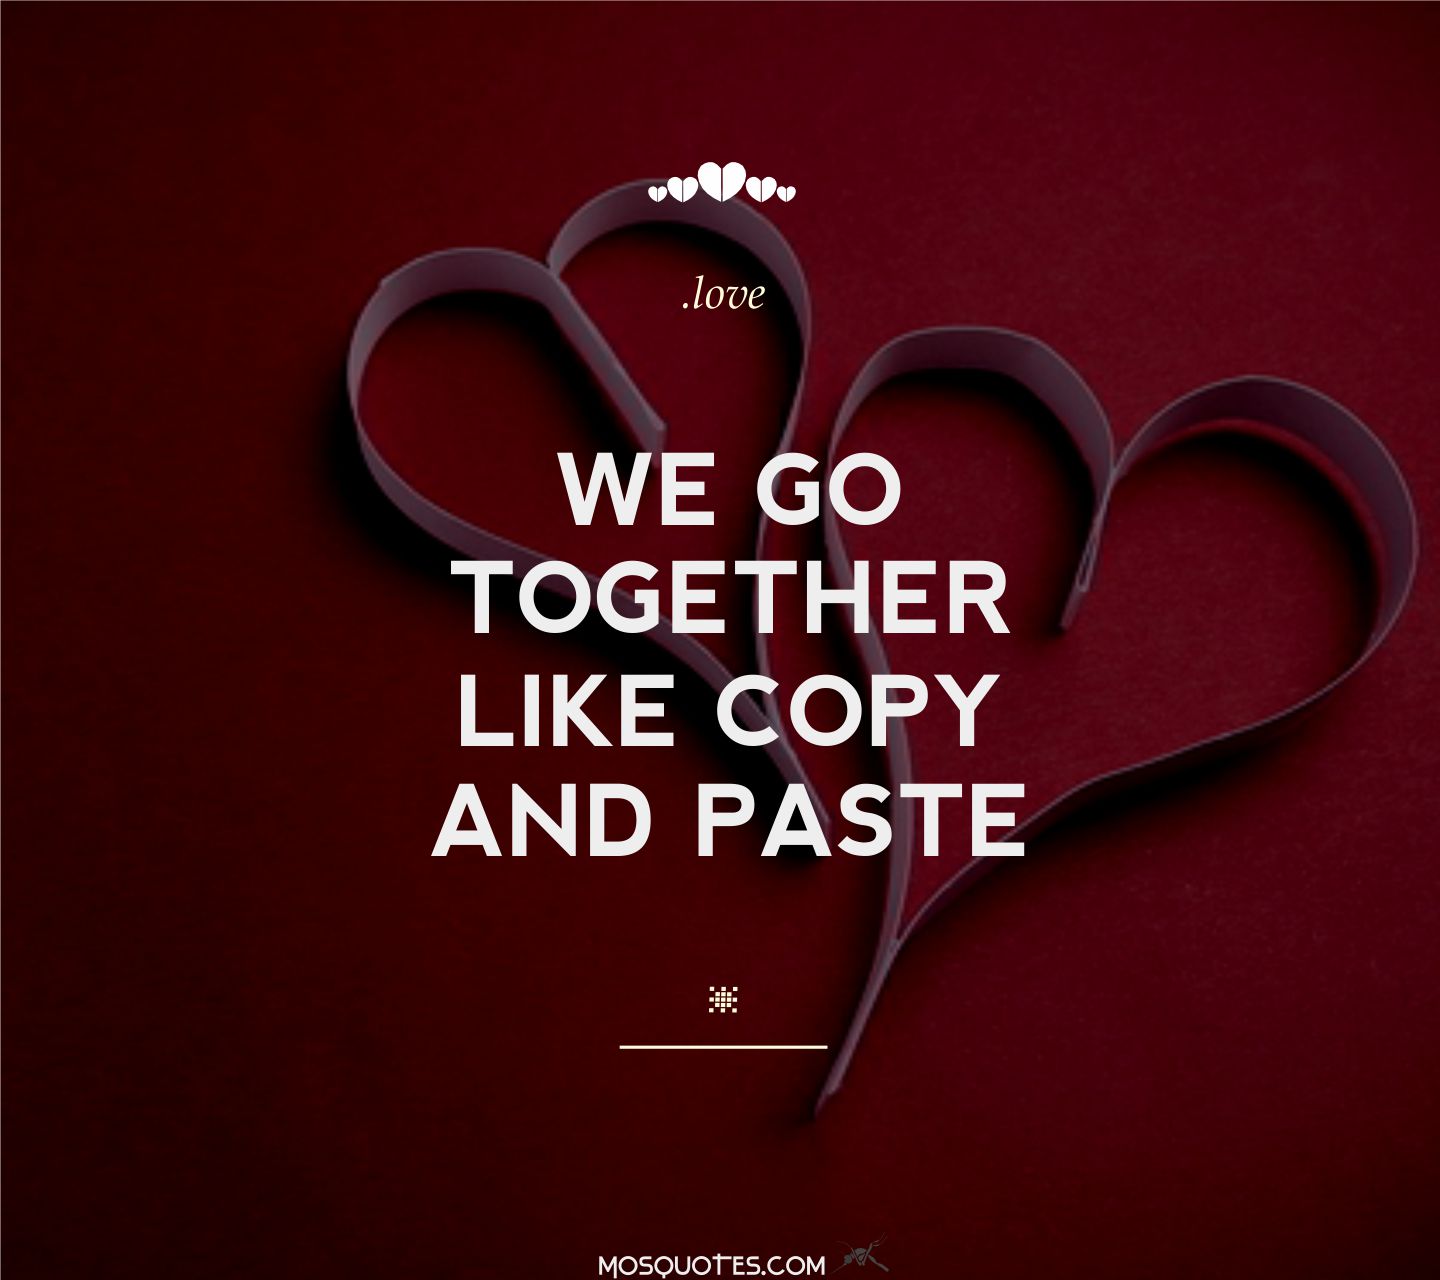 Love copy. I Love you copy and paste. Past Love. We go together like. They like together